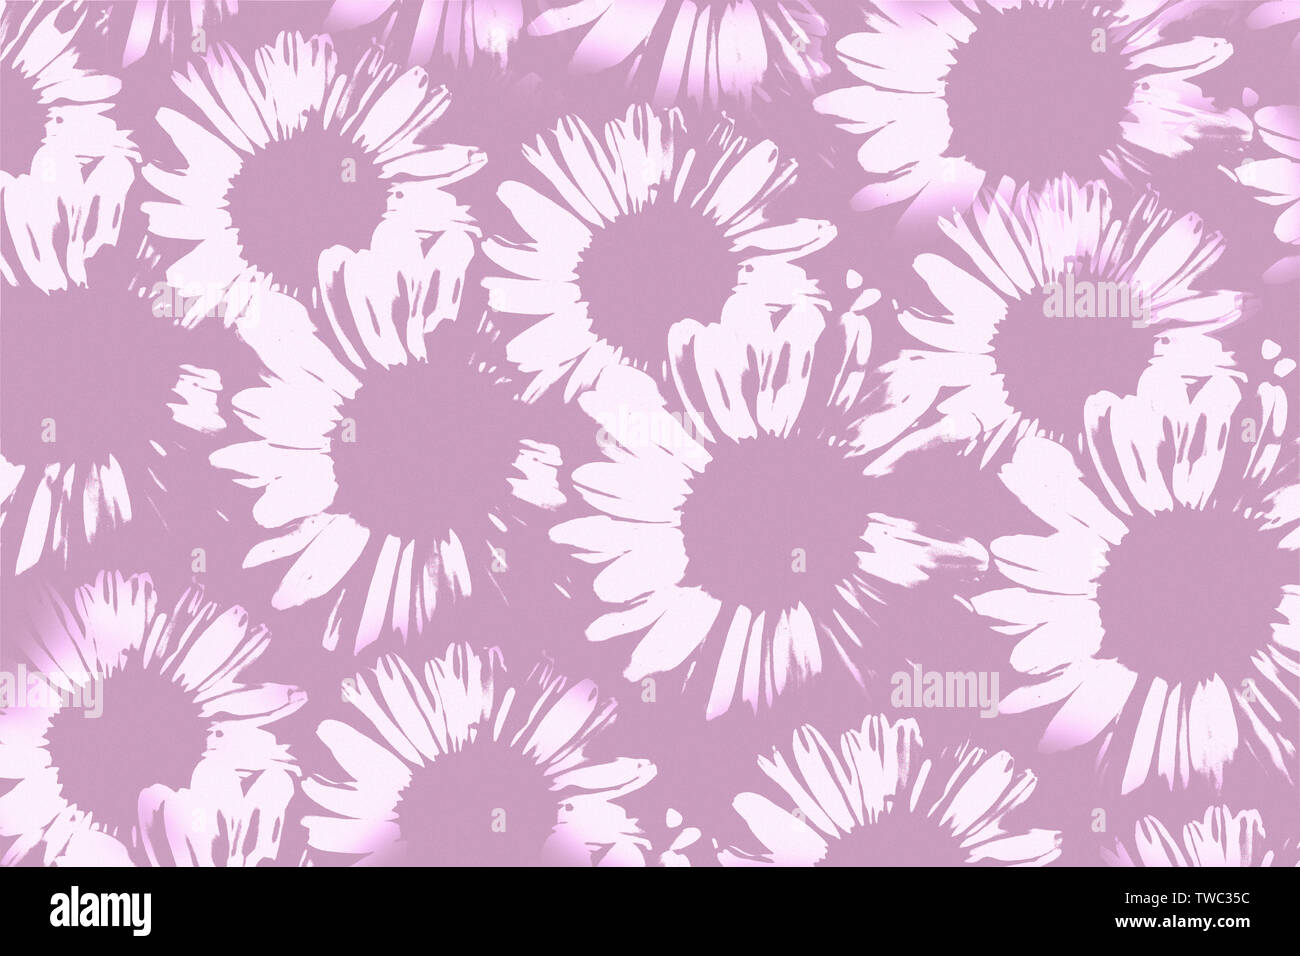 Artistic illustrations of daisies. Great for book covers, magazines, backgrounds etc. Stock Photo